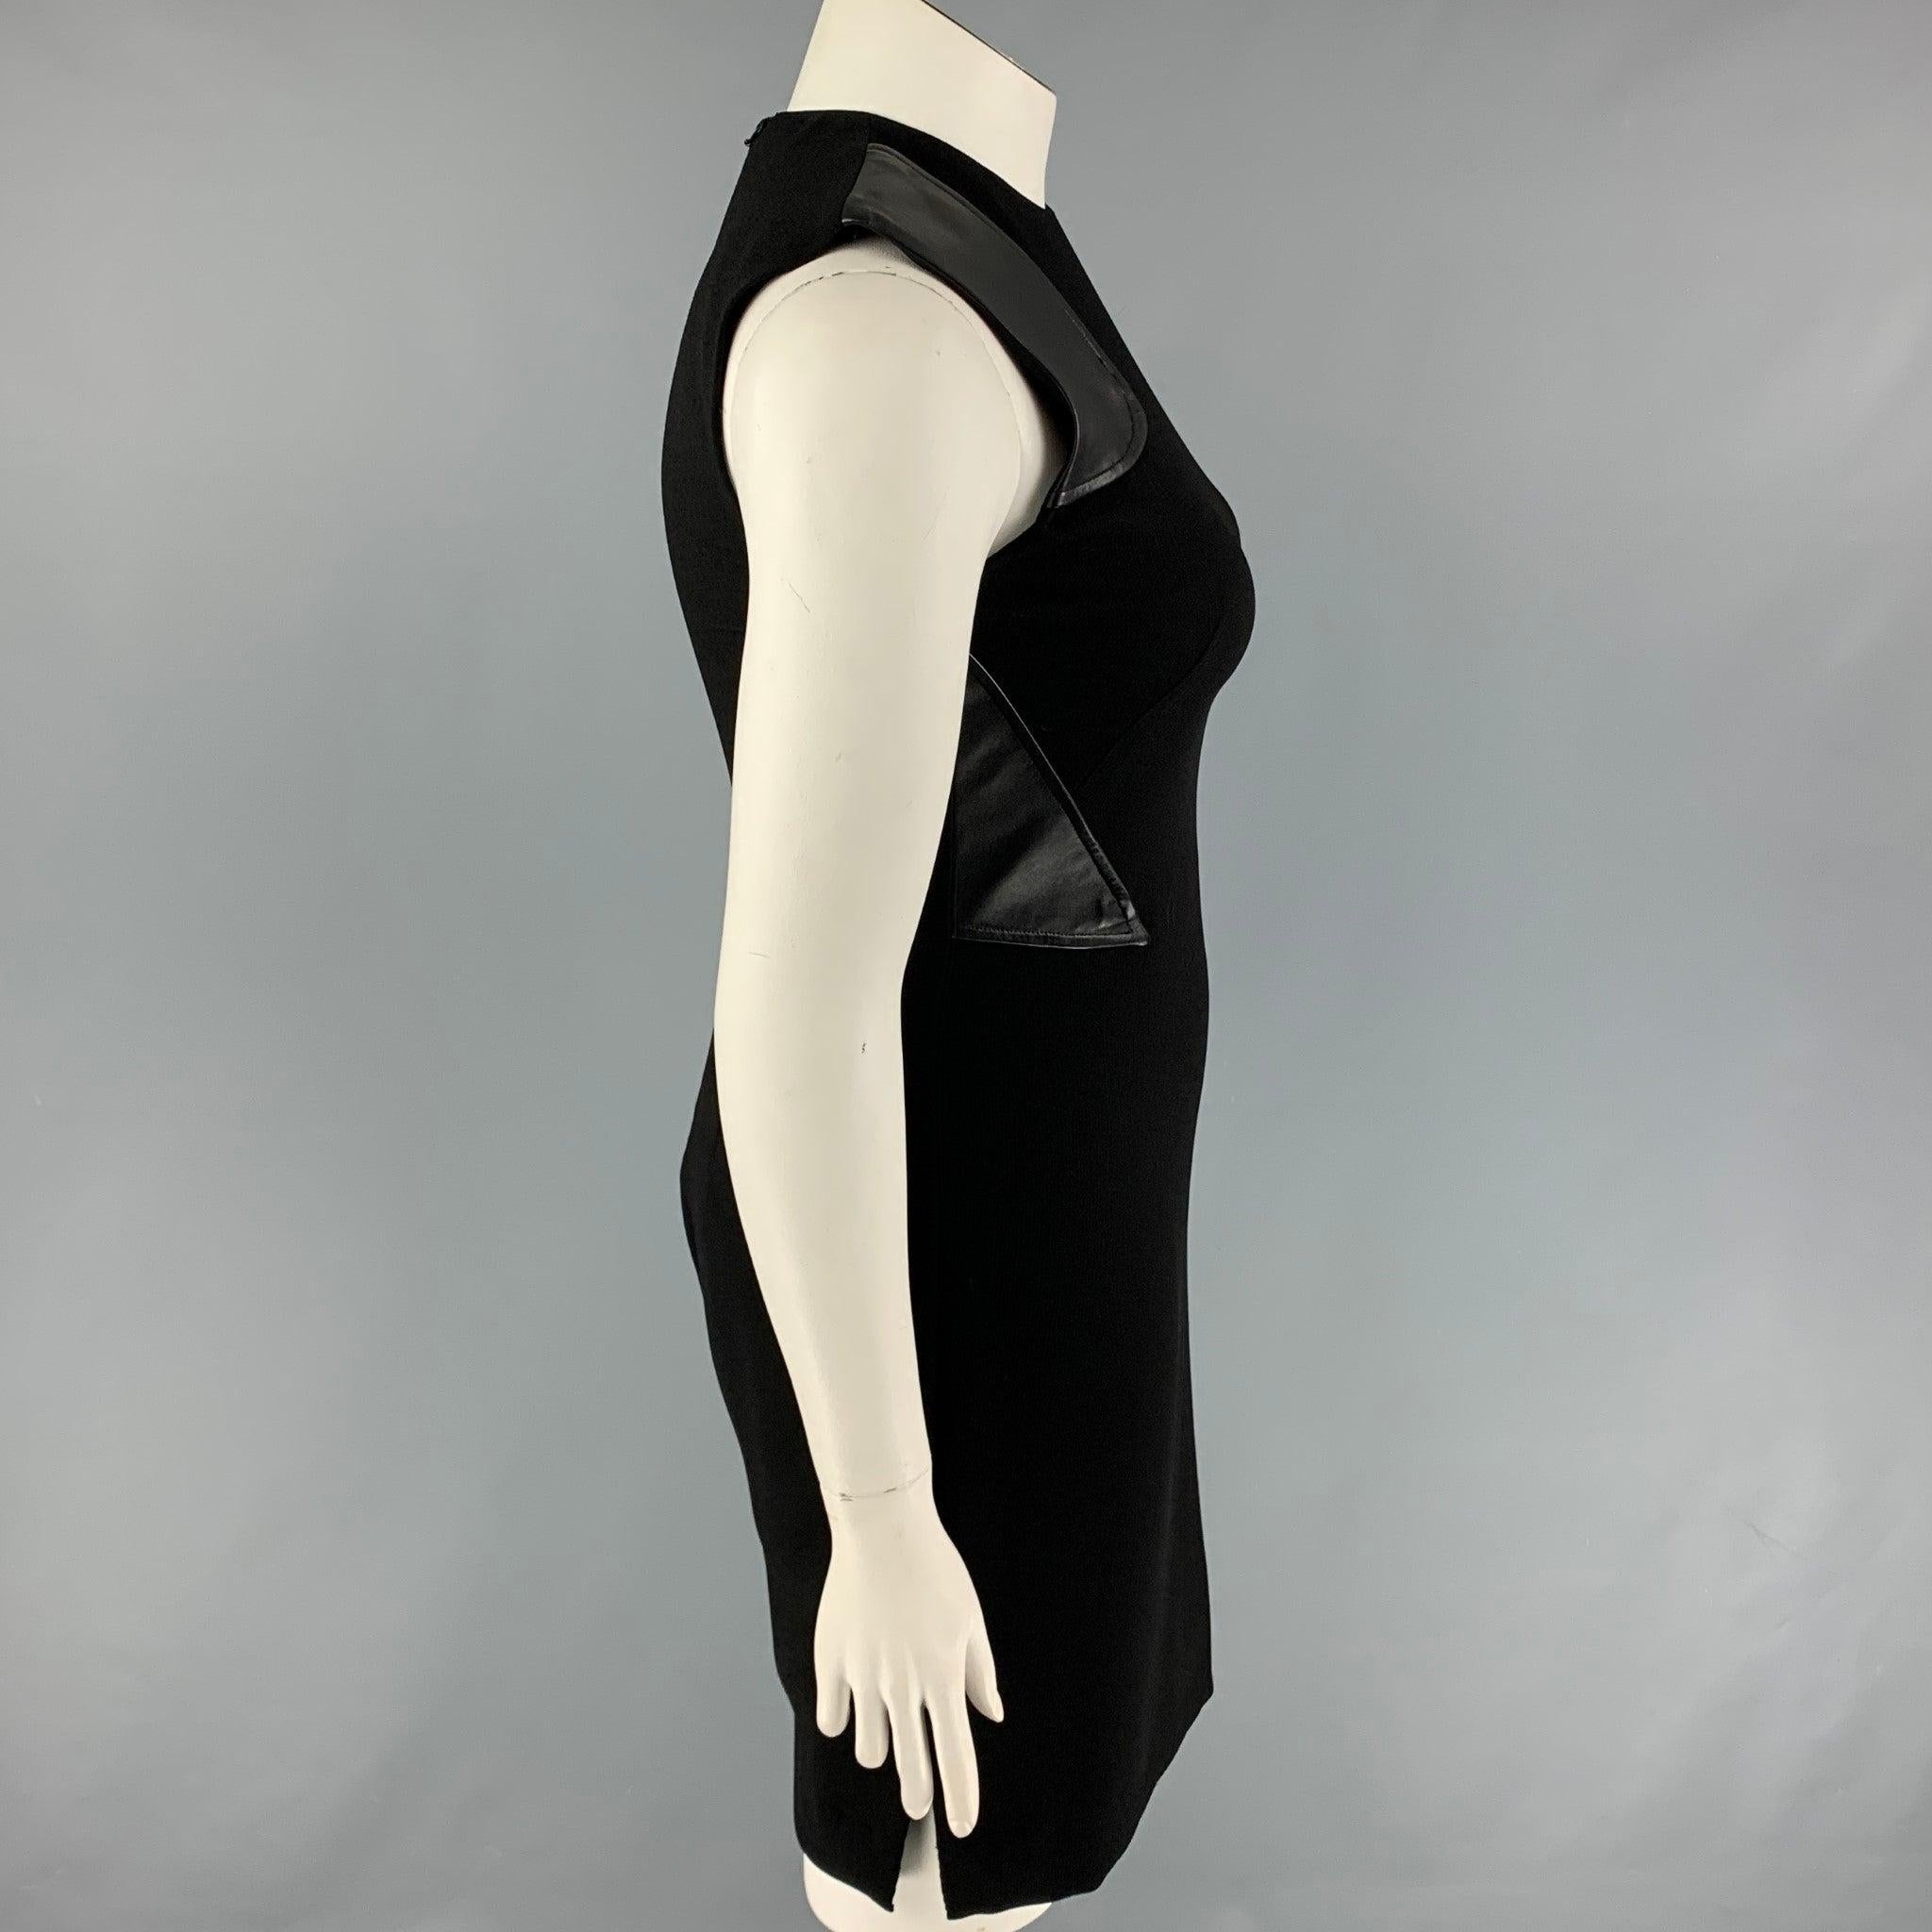 PRABAL GURUNG dress comes in a black polyester featuring a sheath style, leather trim embellishments, sleeveless, and a back zip up closure. Made in USA.
Very Good
Pre-Owned Condition. 

Marked:   10 

Measurements: 
 
Shoulder: 13 inches  Bust: 33